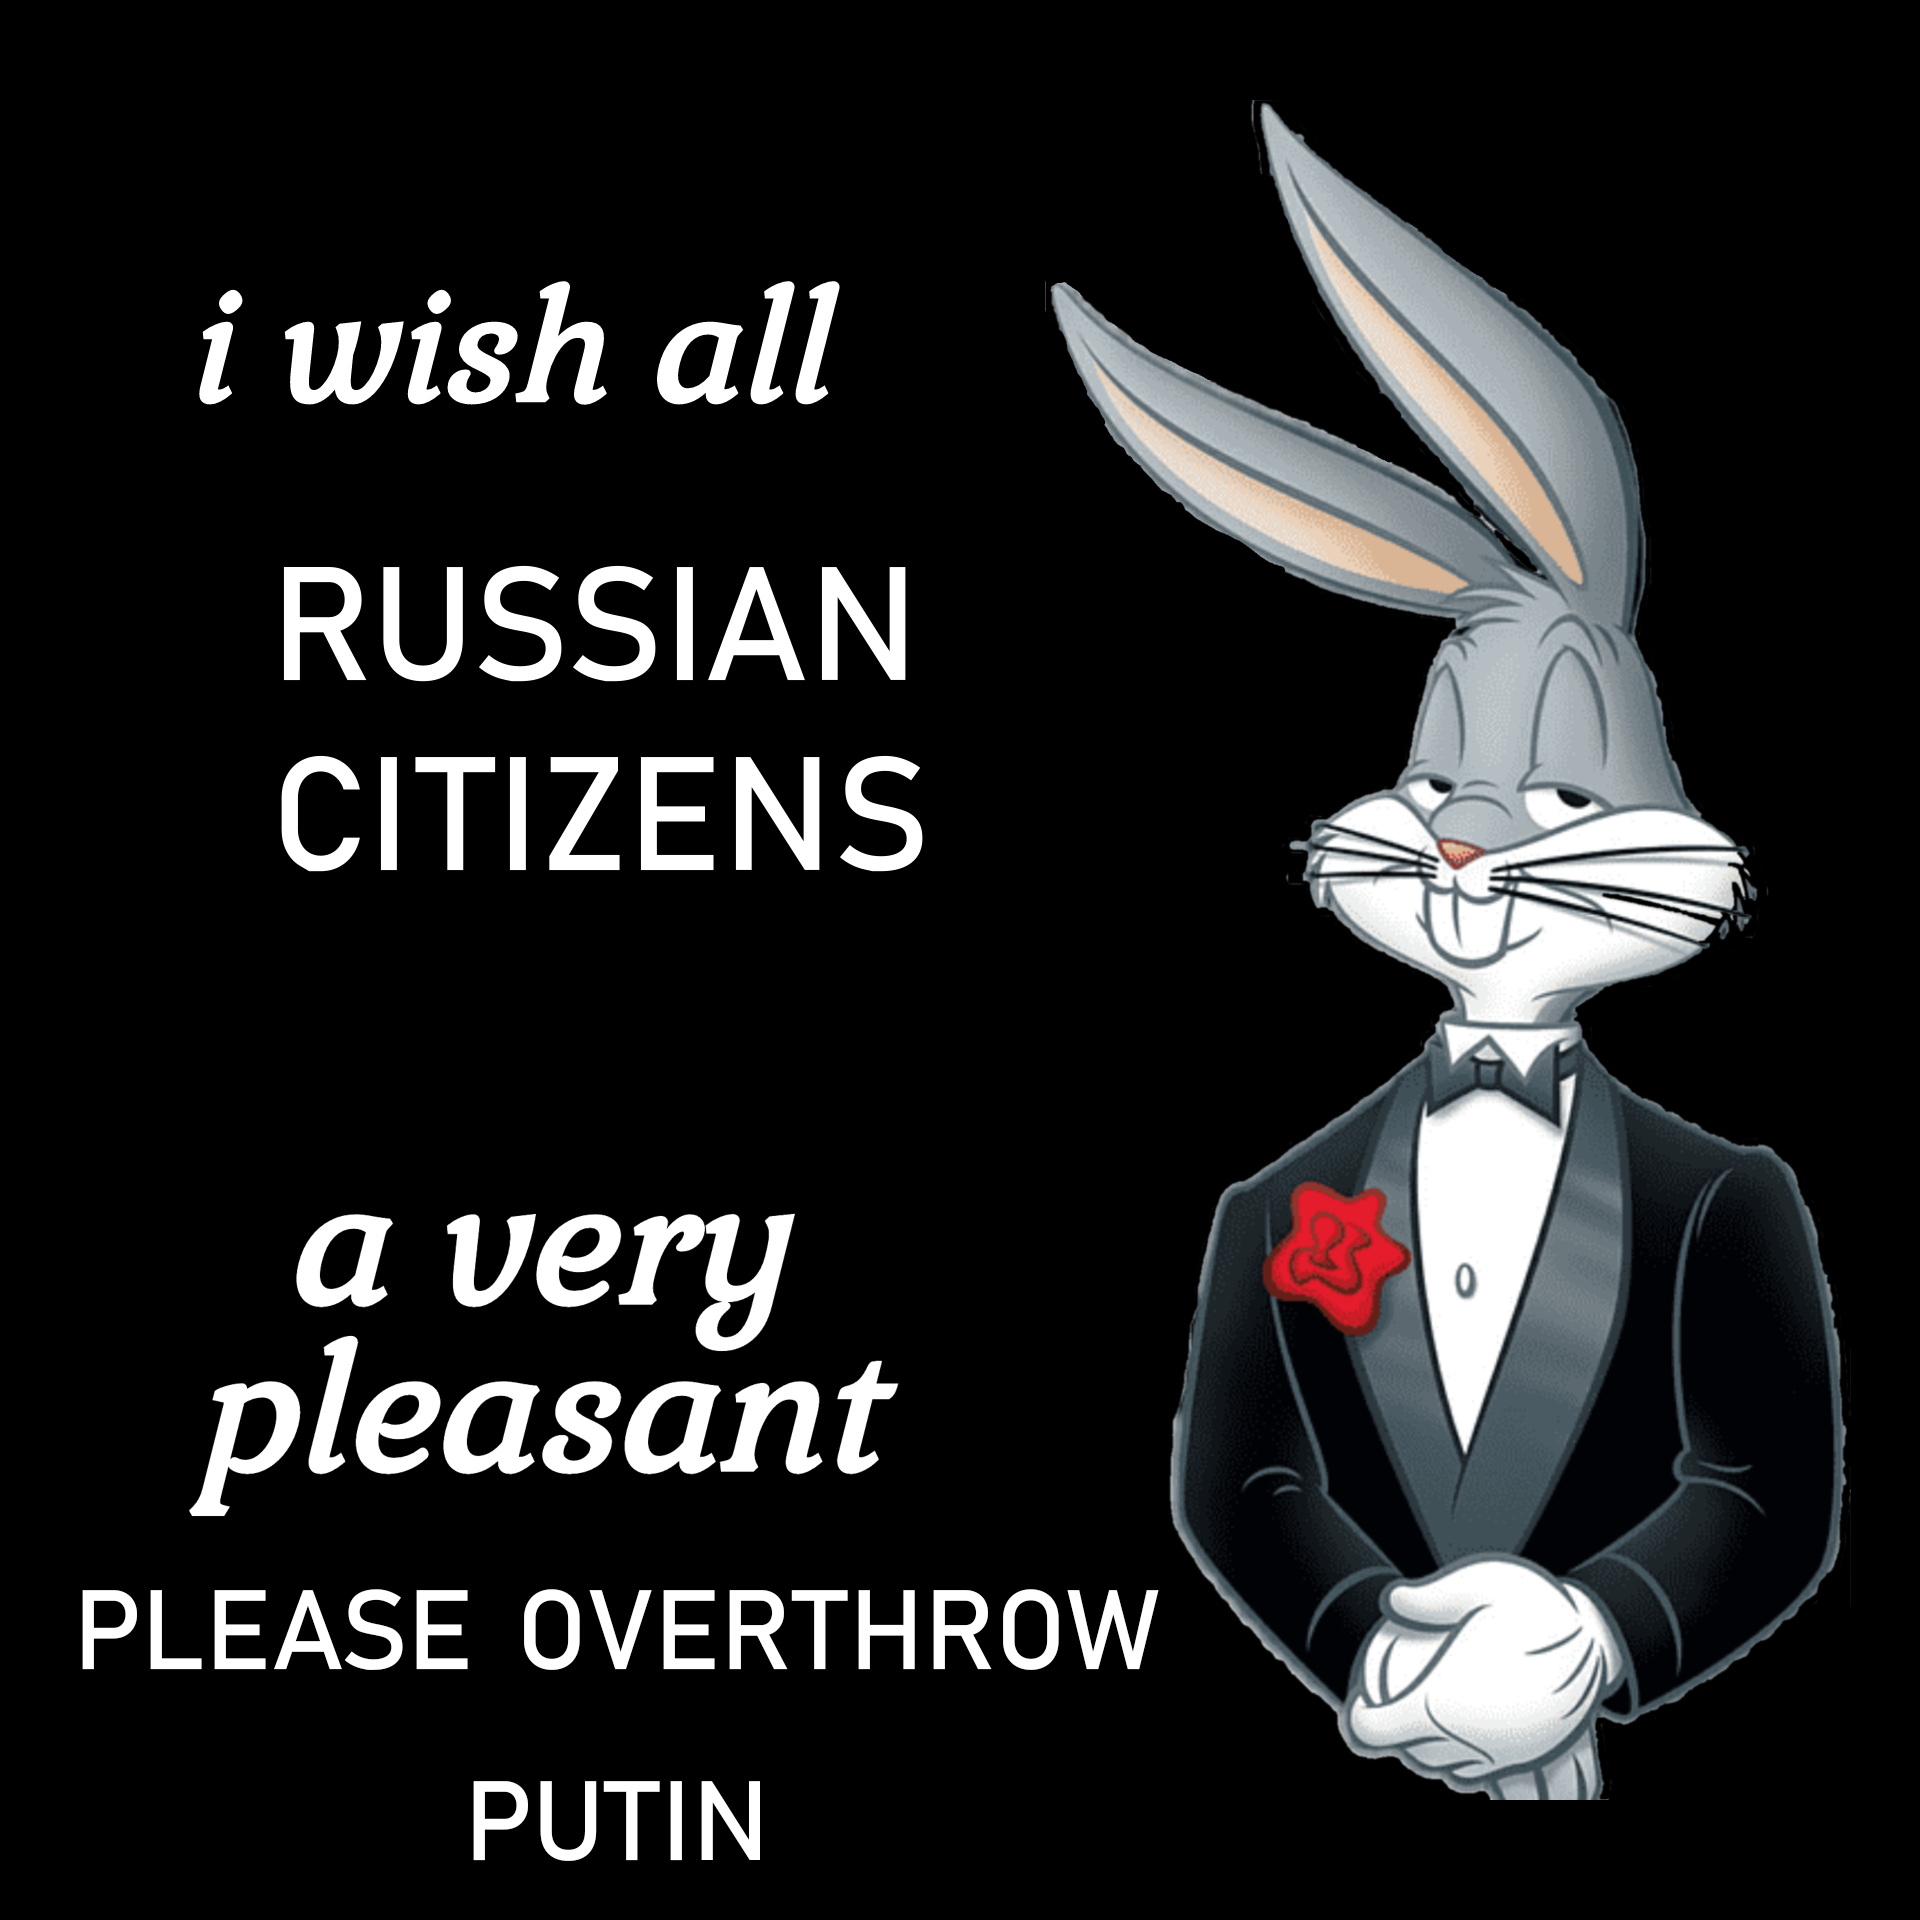 Dear Humans who happen to be Russian